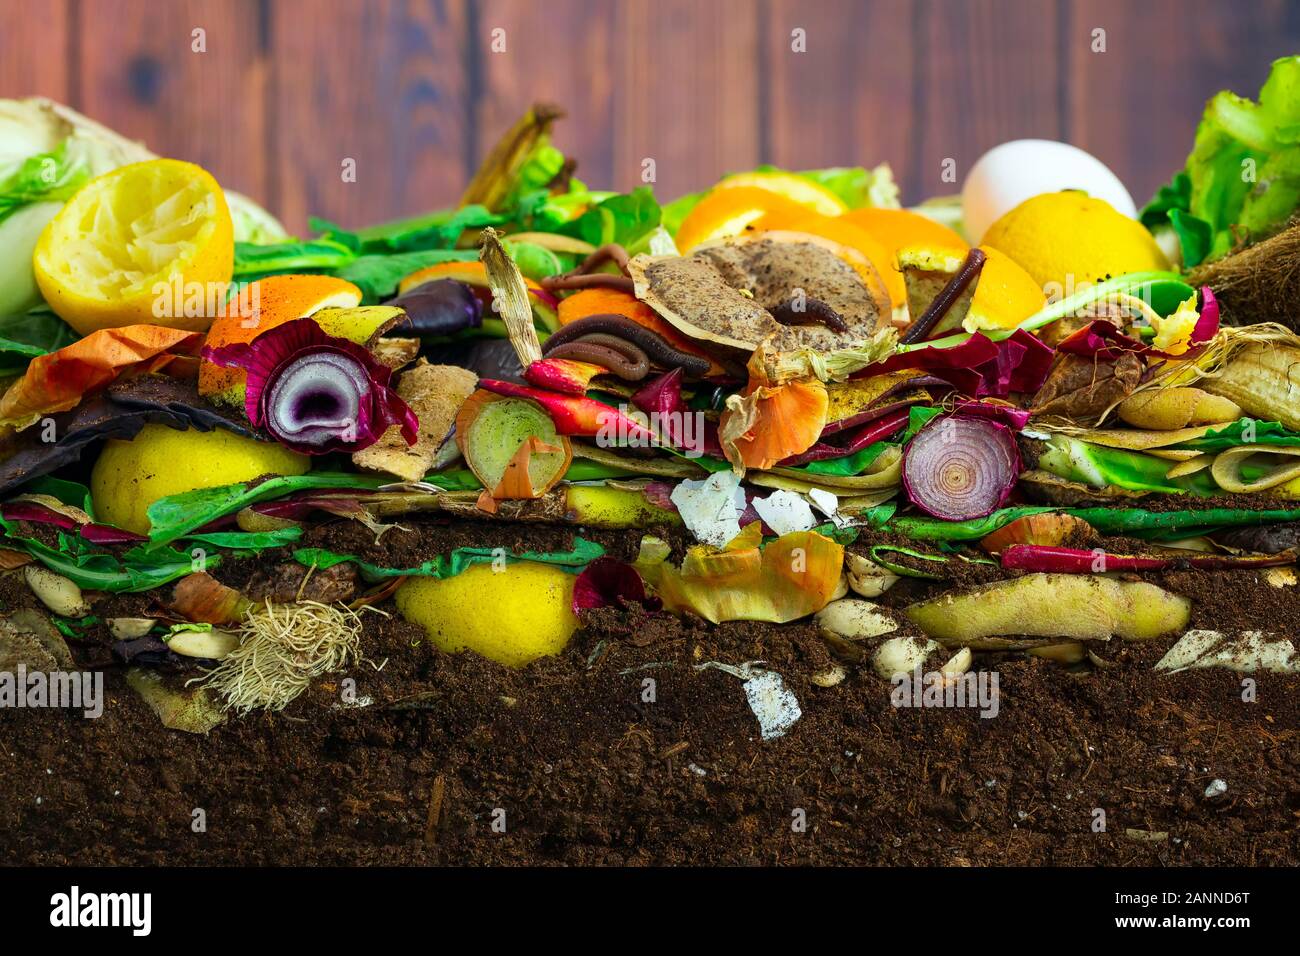 Earthwoms living in a colorful compost heap consisting of rotting kitchen leftovers Stock Photo